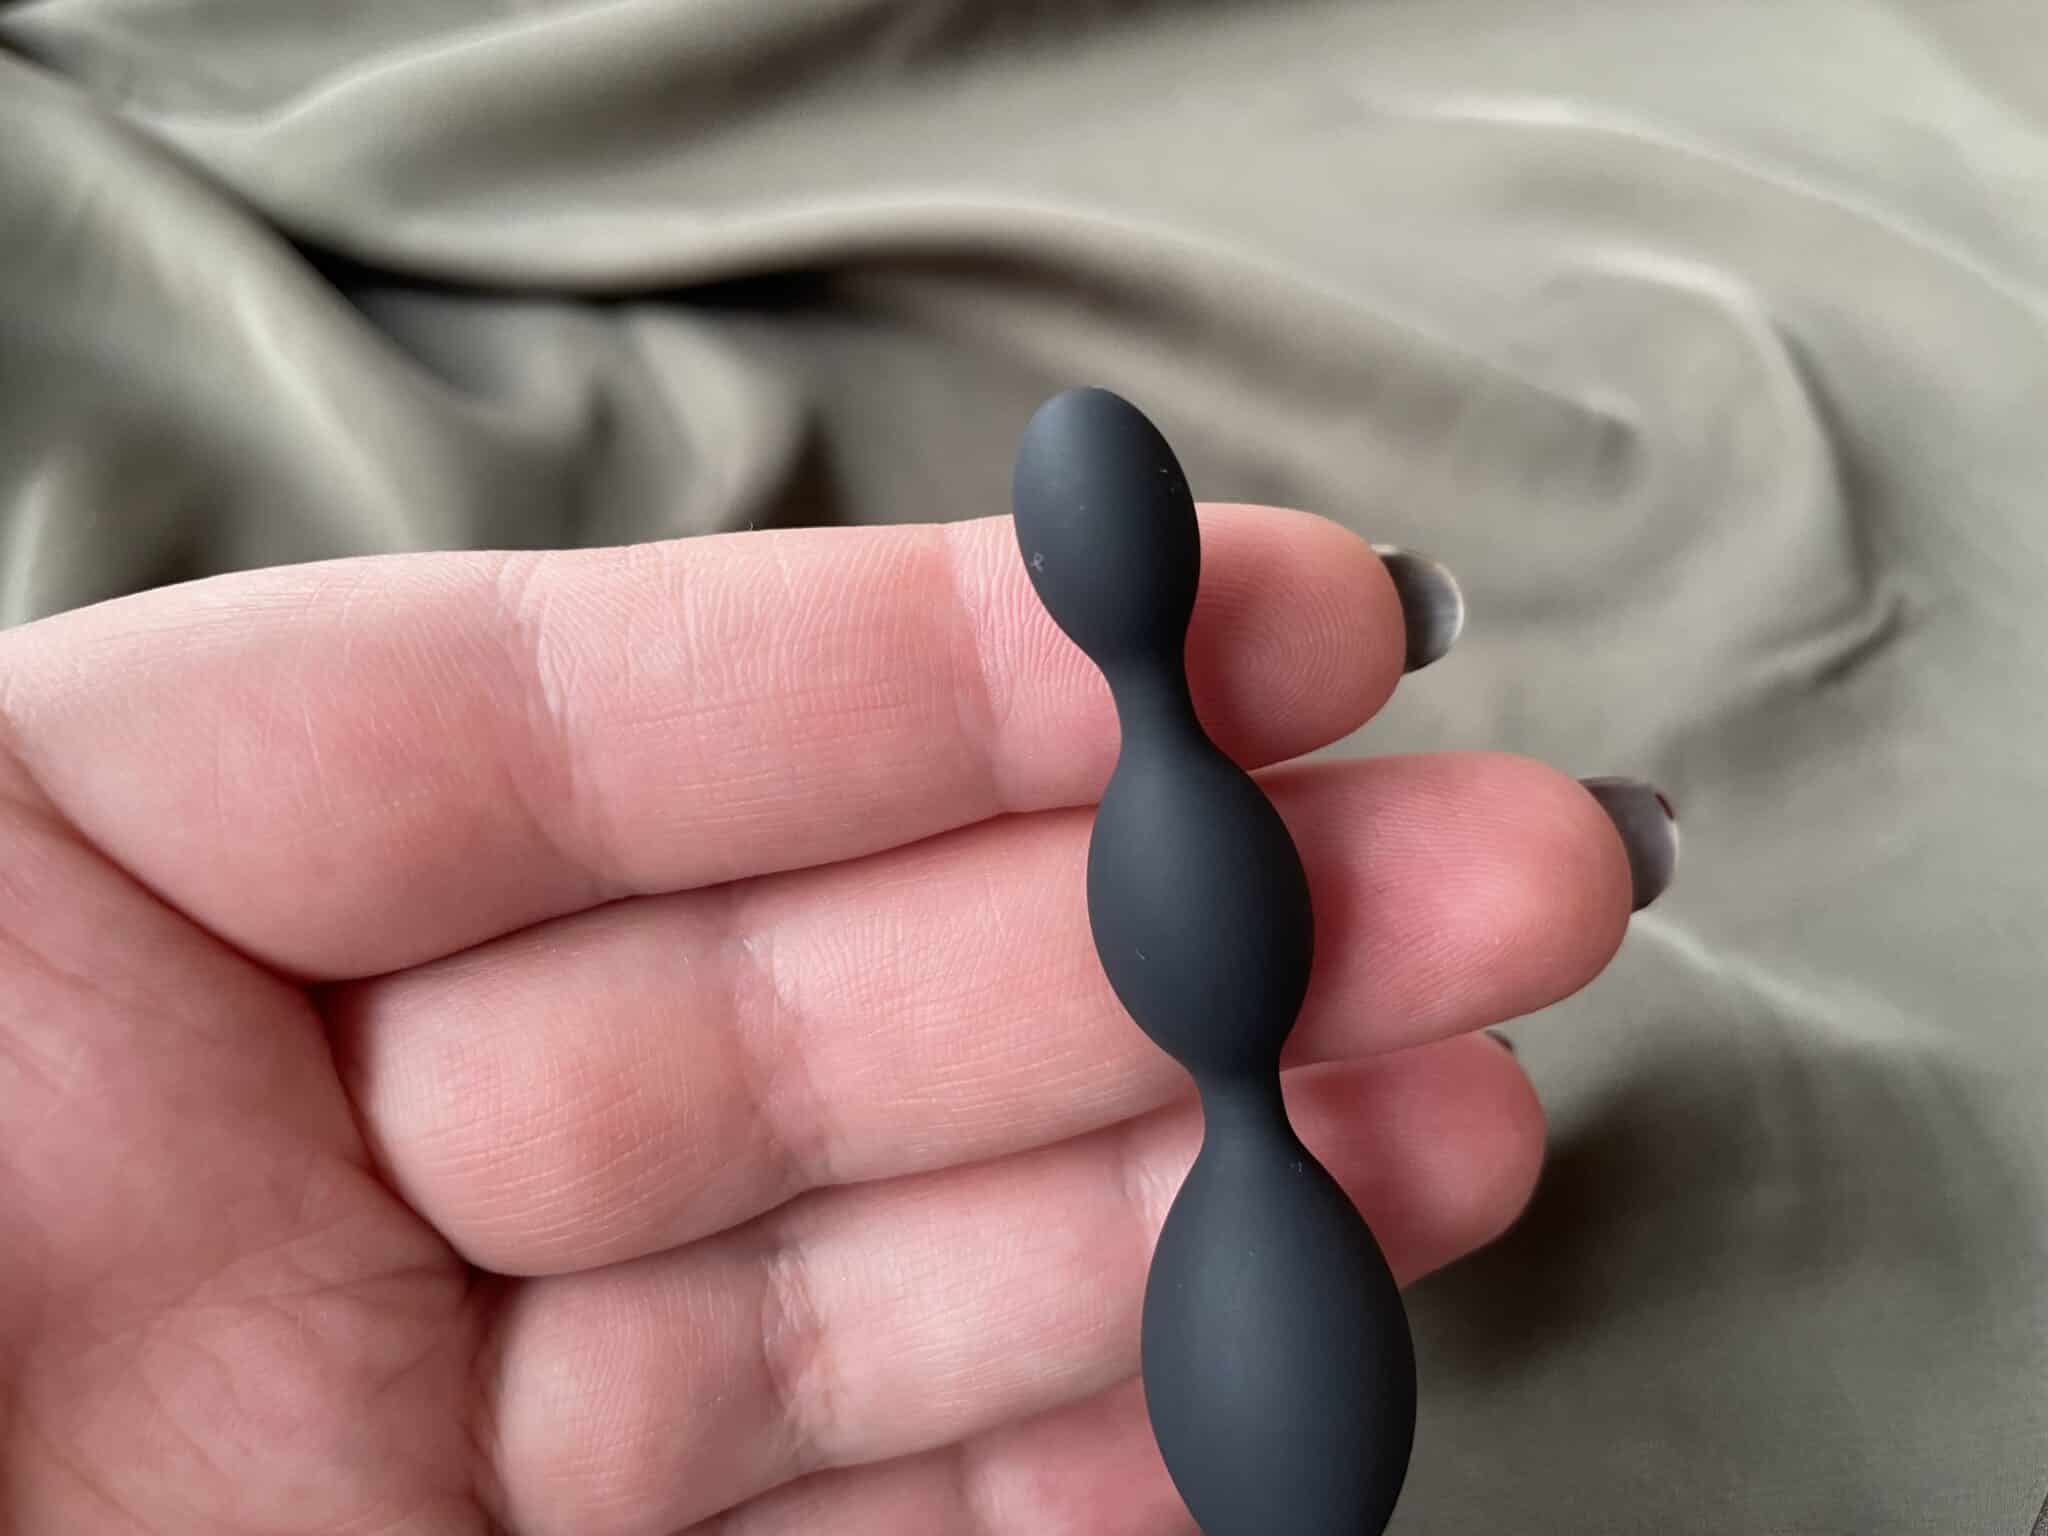 Fifty Shades of Grey Anal Beads. Slide 4